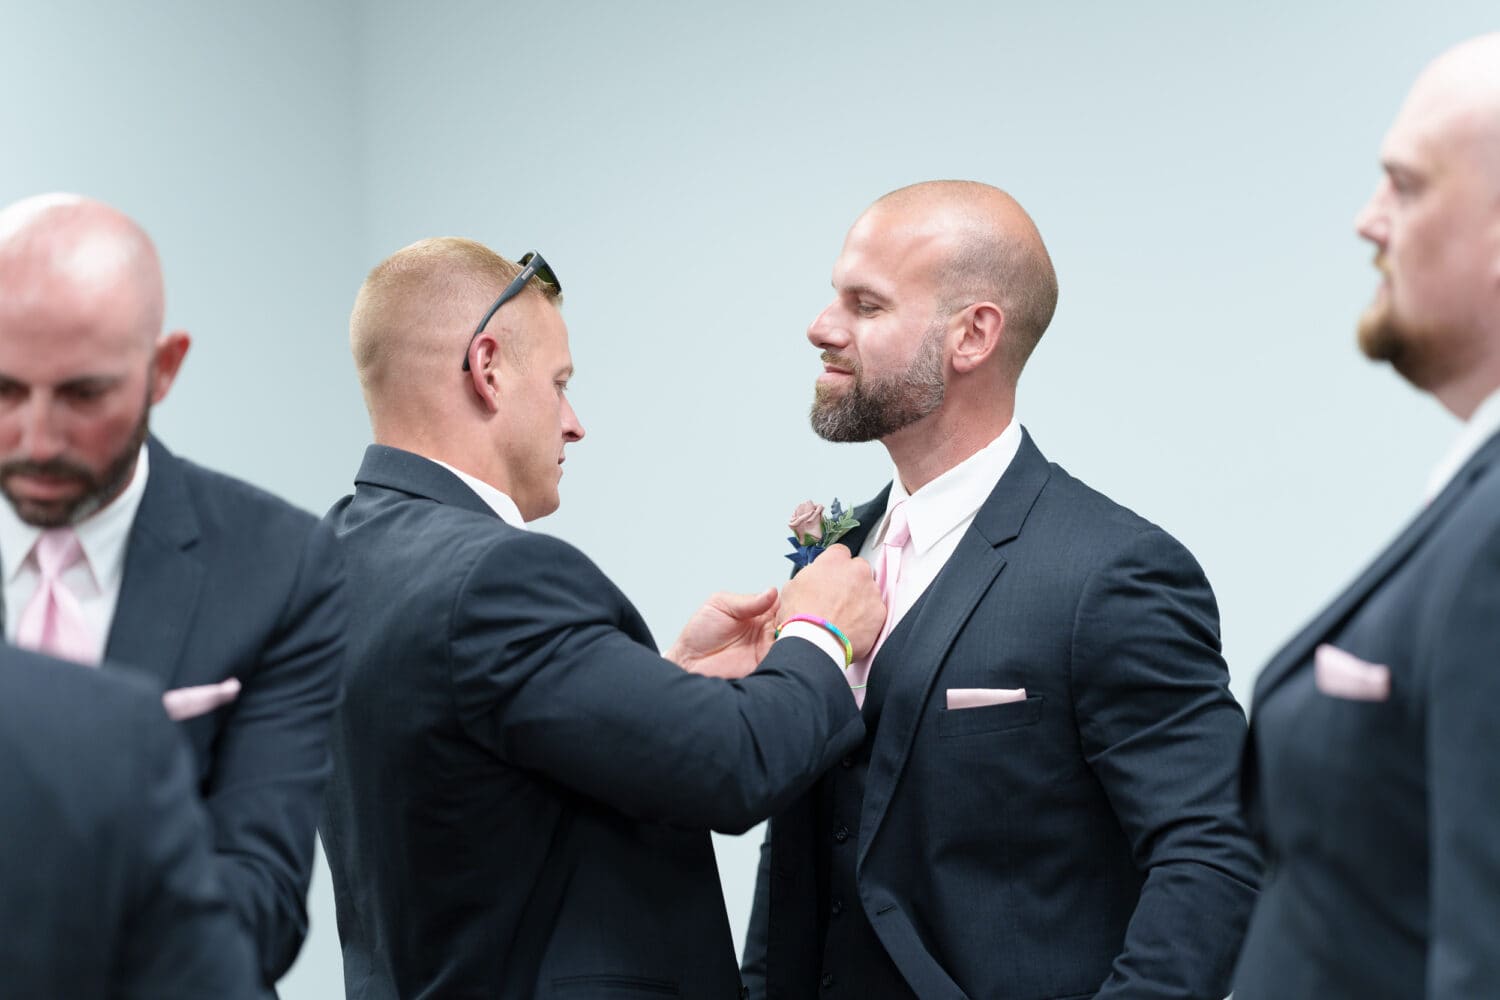 Putting on boutonniere before the ceremony - Hotel Indigo